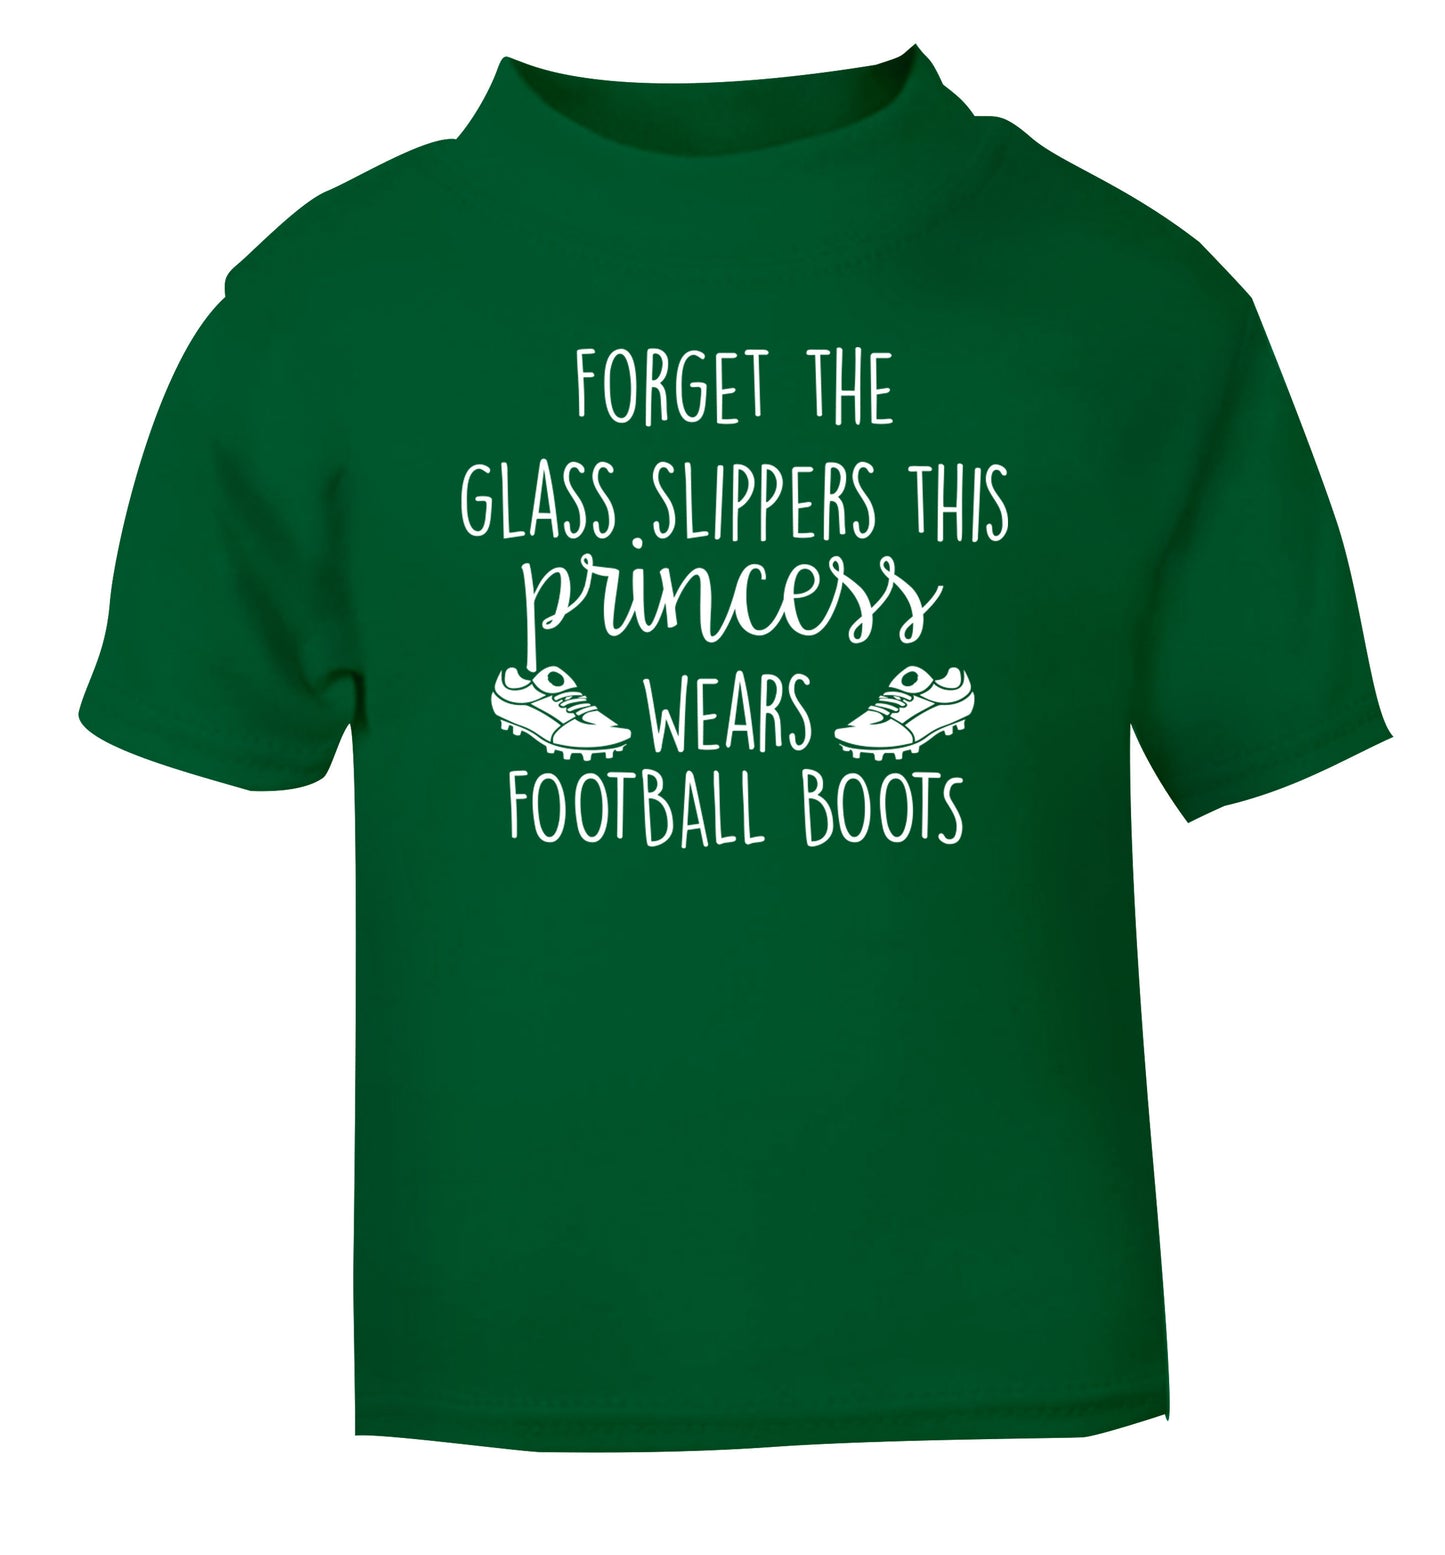 Forget the glass slippers this princess wears football boots green Baby Toddler Tshirt 2 Years